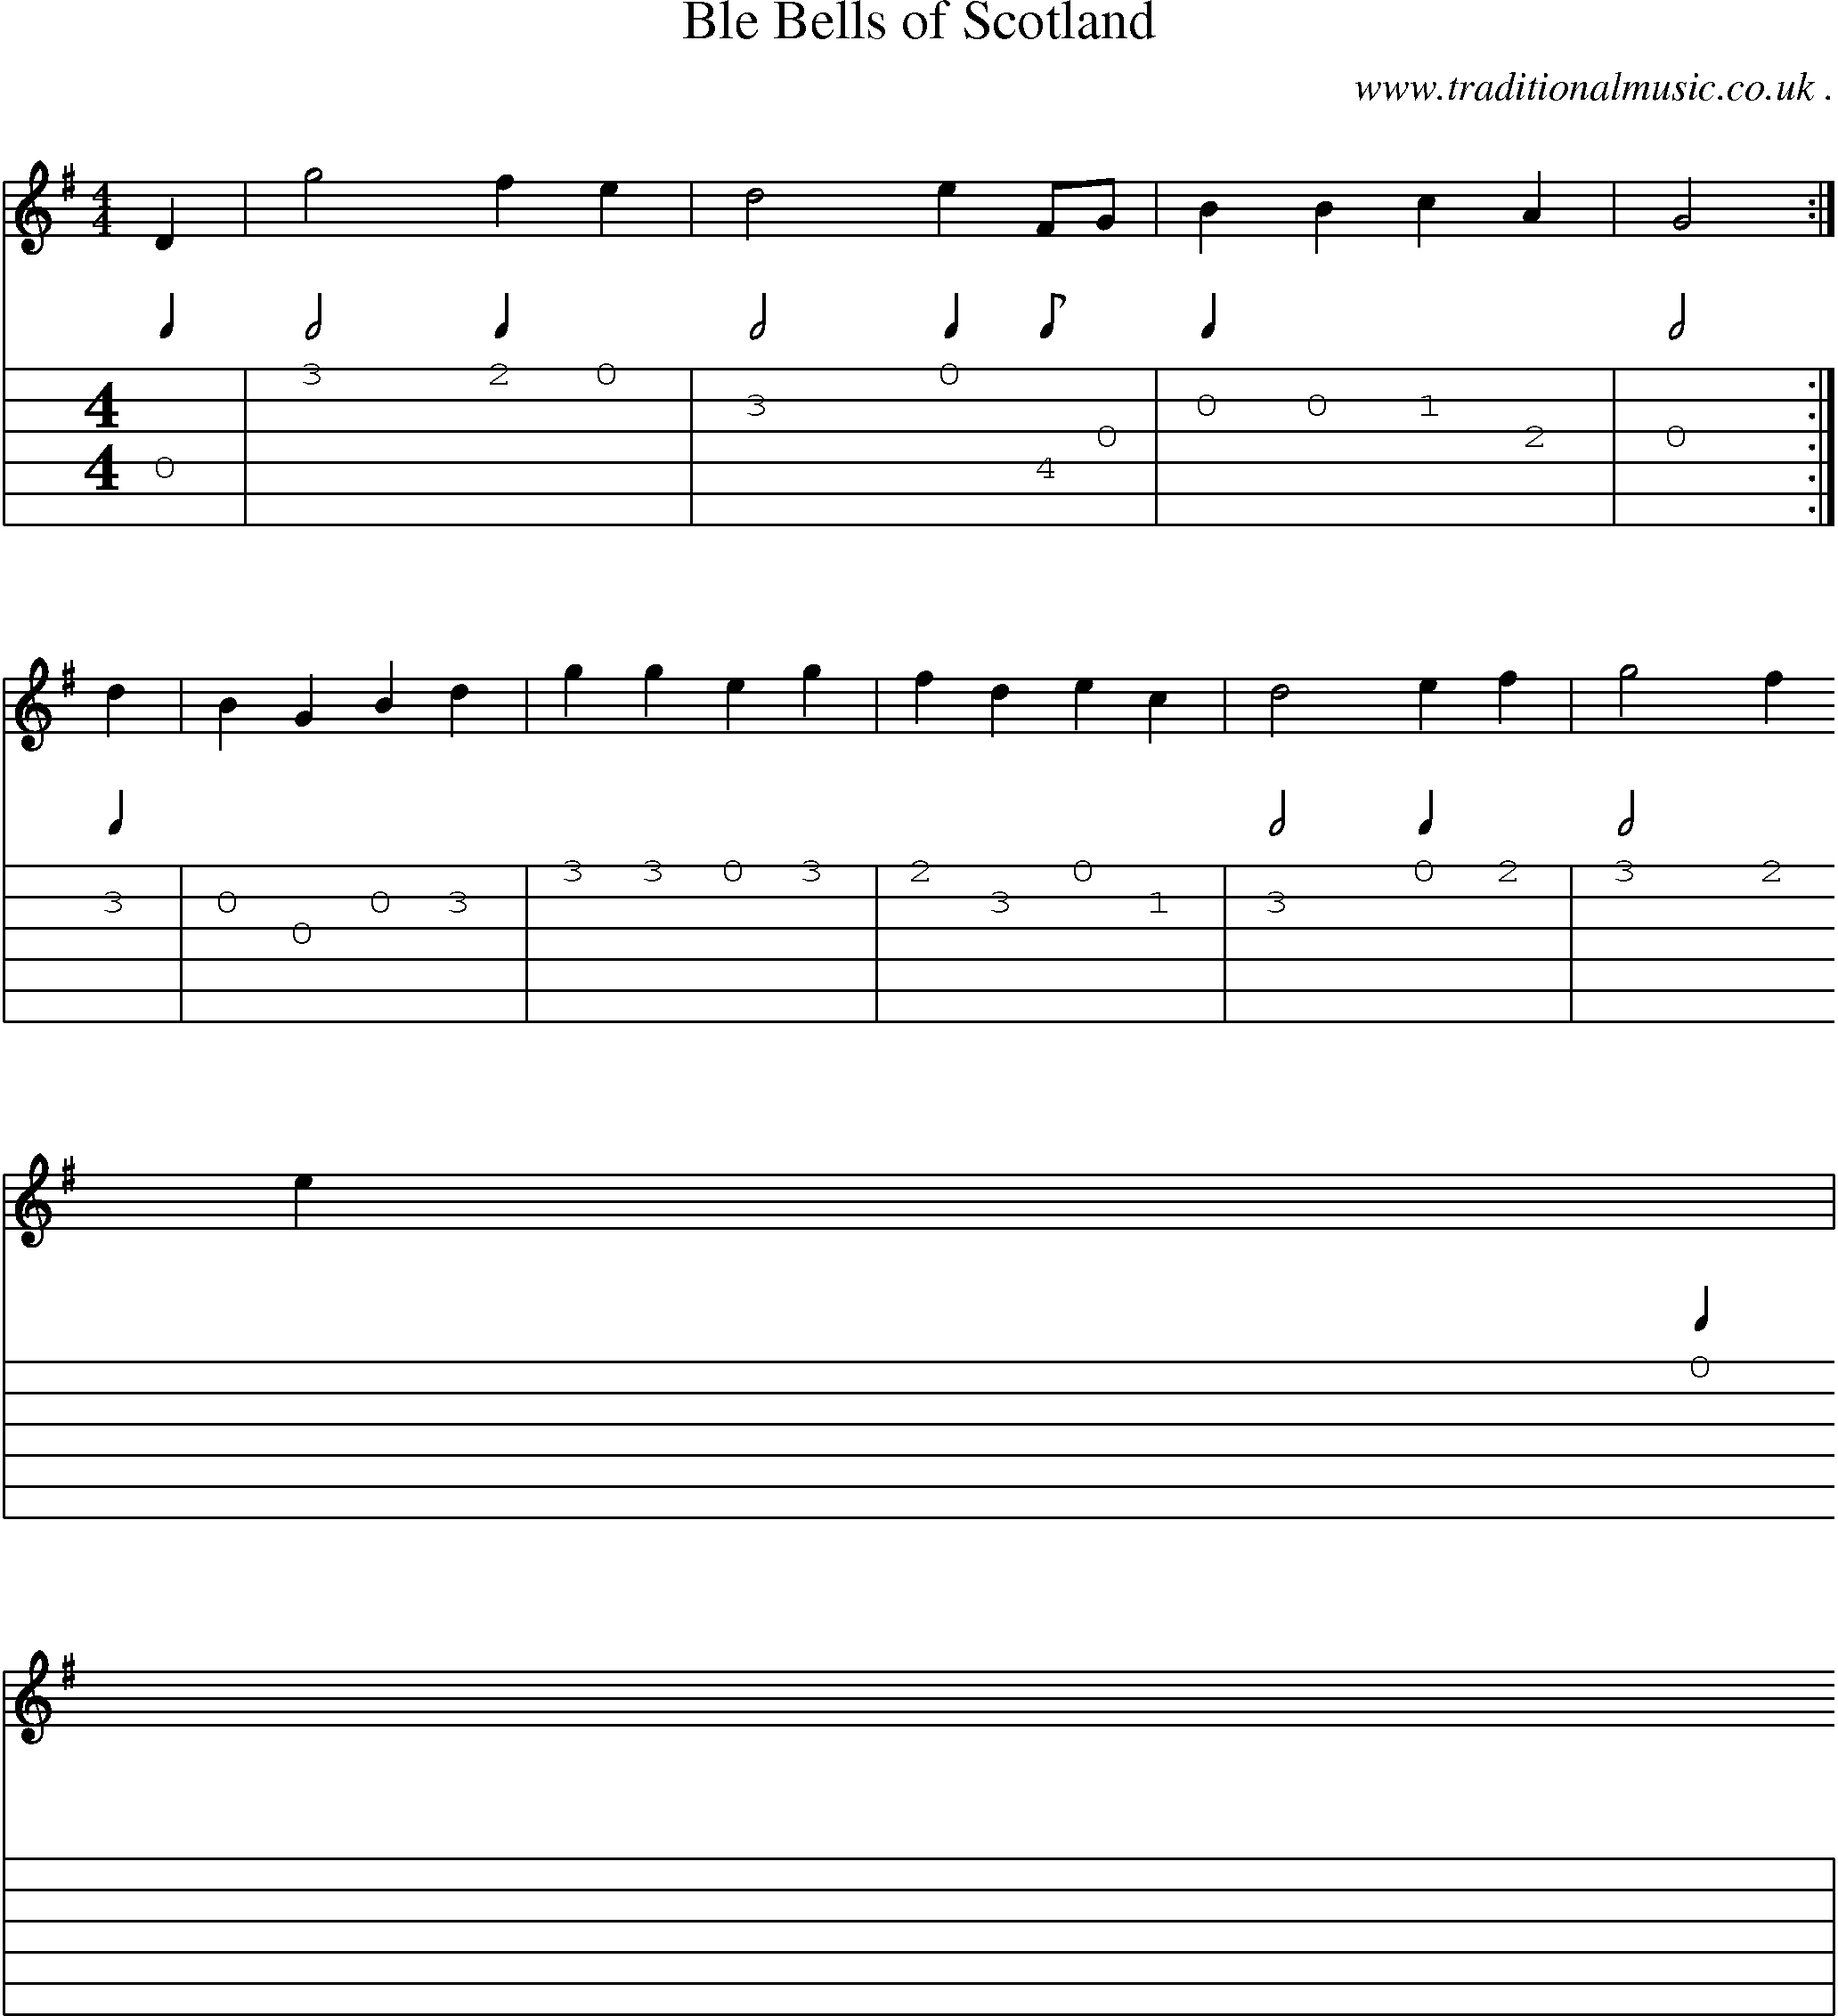 Sheet-Music and Guitar Tabs for Ble Bells Of Scotland